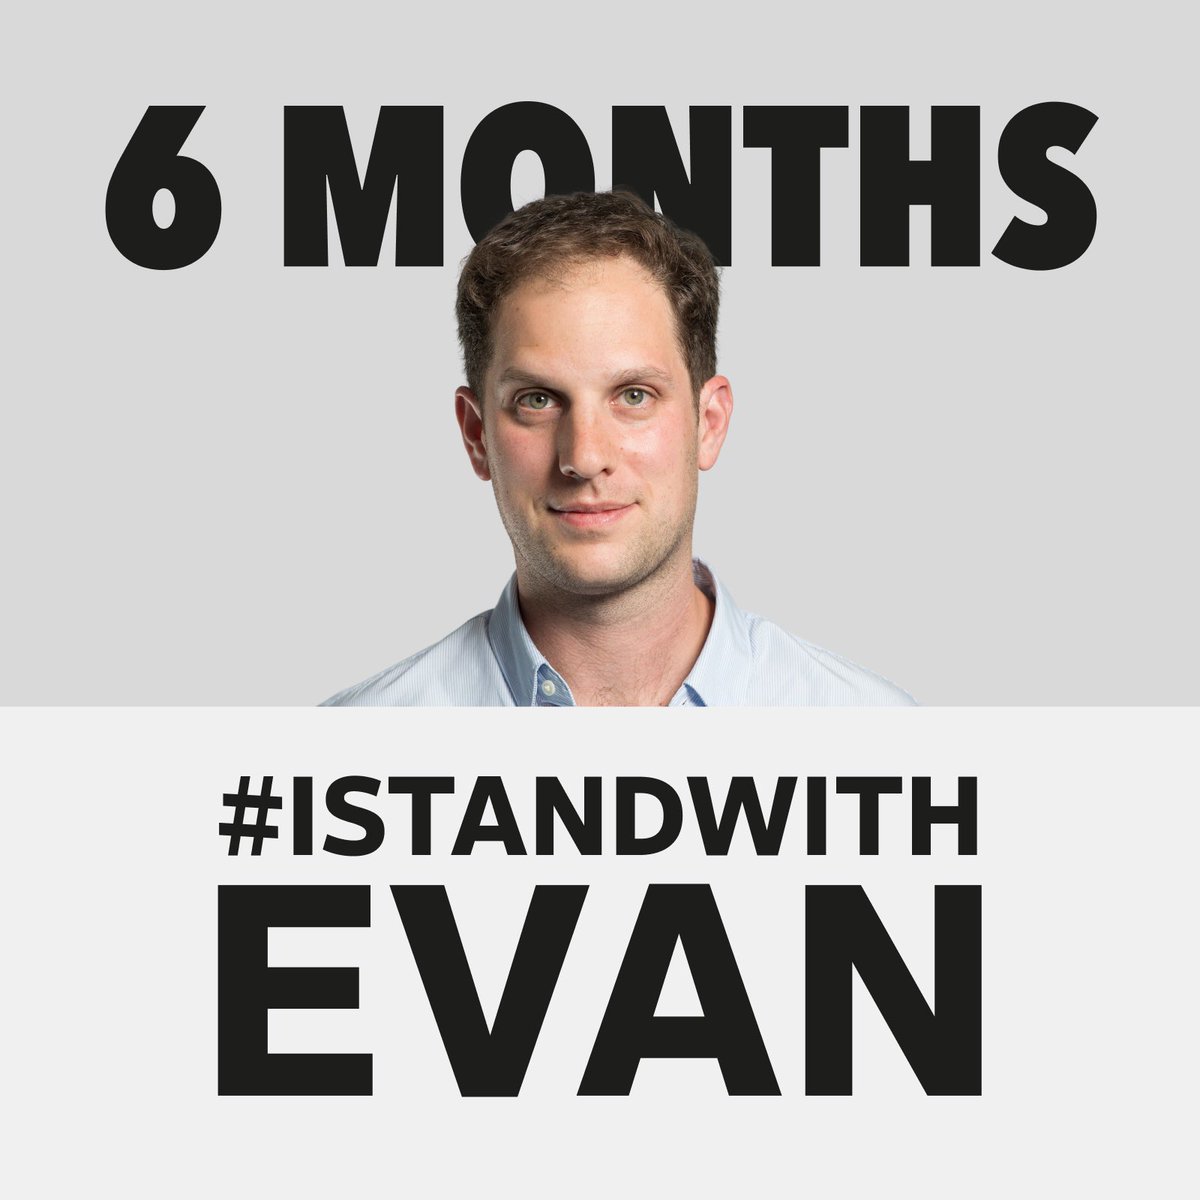 It's been 6 months since @WSJ reporter Evan Gershkovich was wrongfully detained by Russia during a reporting trip & falsely accused of espionage. His arrest is a brazen violation of press freedom. Please visit WSJ.com/Evan to learn more & get involved. #IStandWithEvan